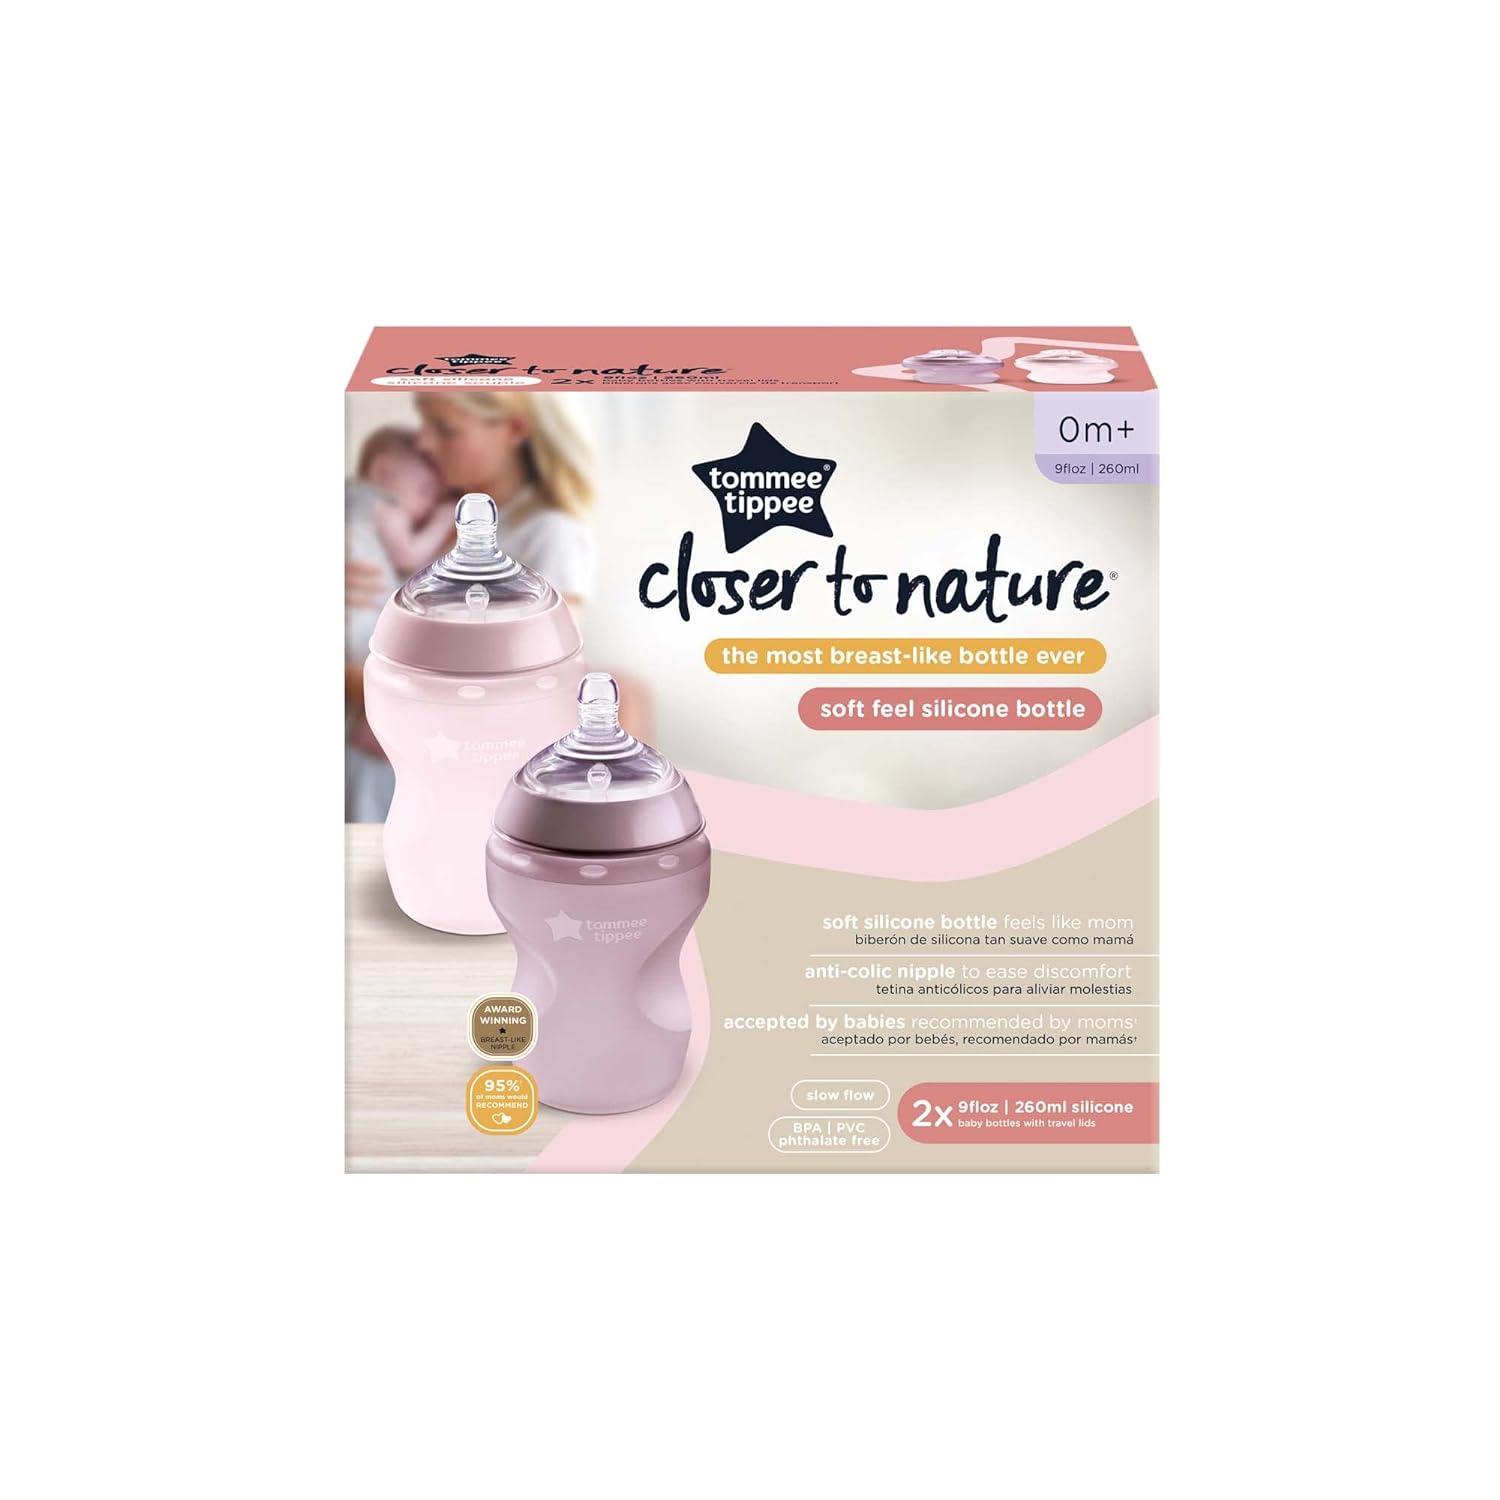 Tommee Tippee Closer to Nature Soft Feel Silicone Baby Bottle Slow